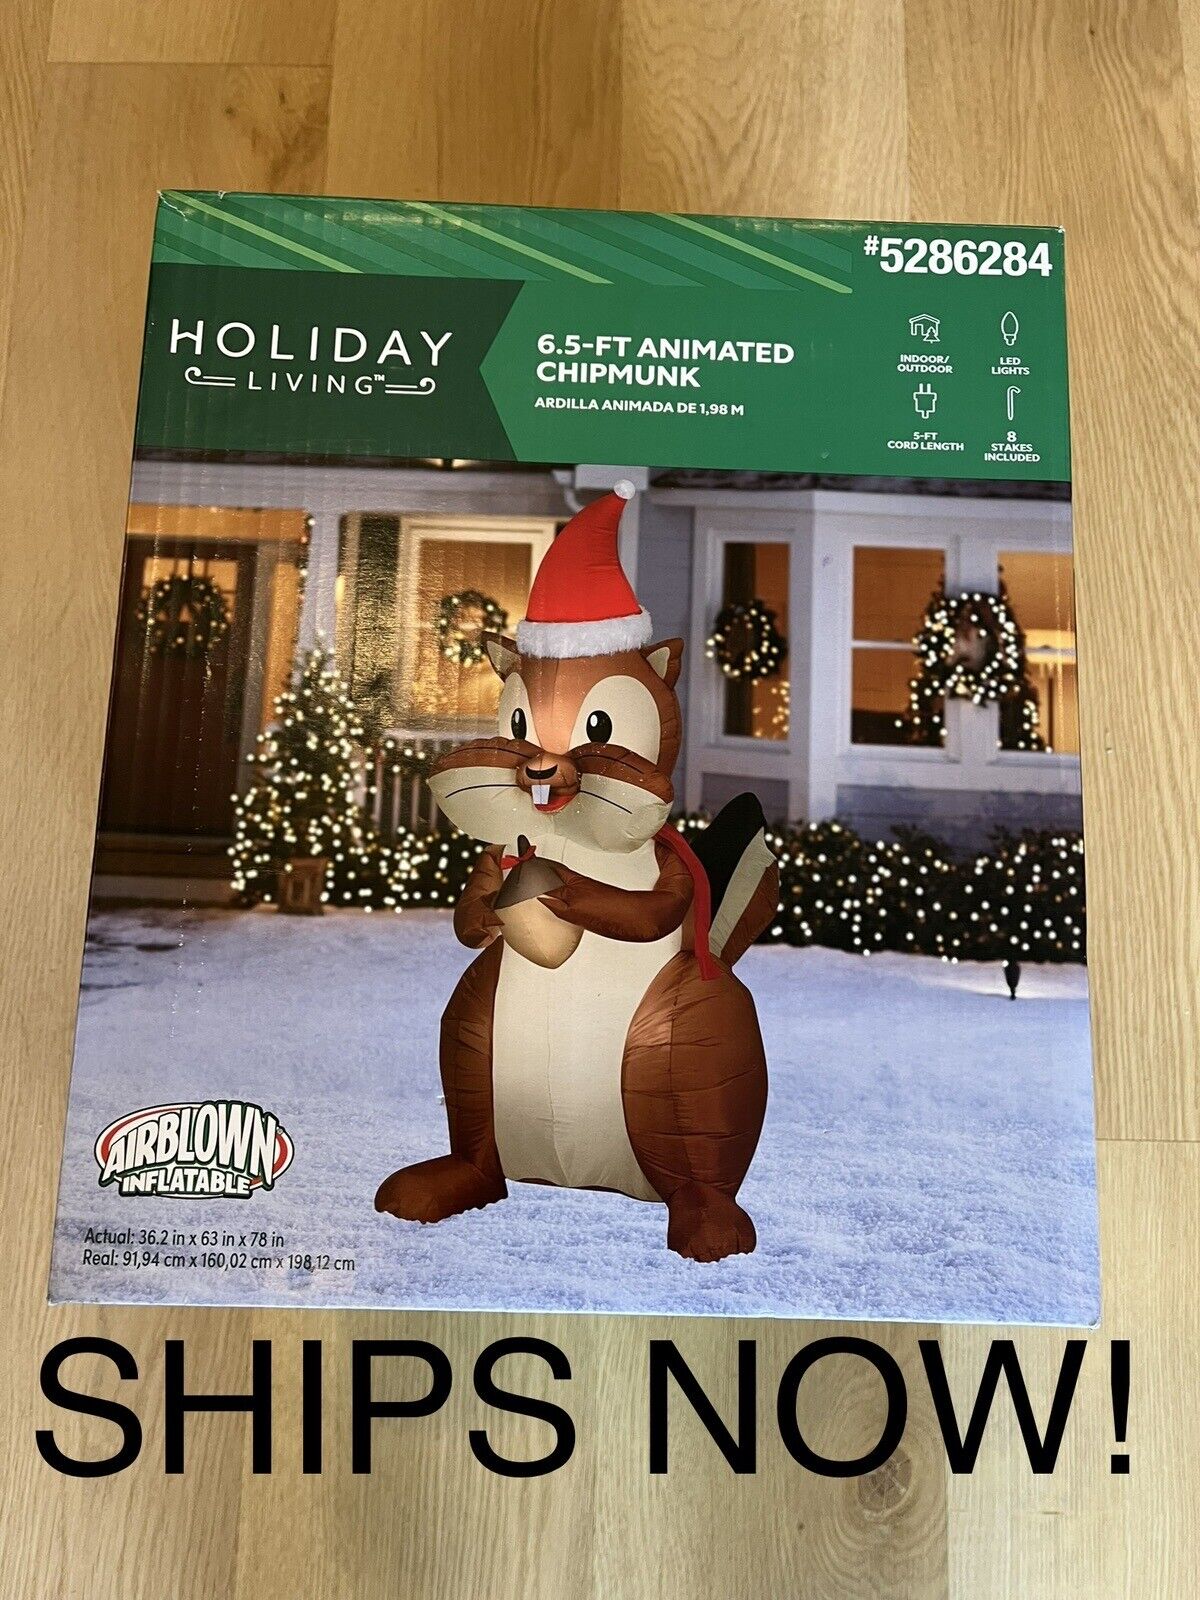 NEW 6.5 FT TALL CHRISTMAS ANIMATED CHIPMUNK WITH SANTA HAT LED GEMMY INFLATABLE